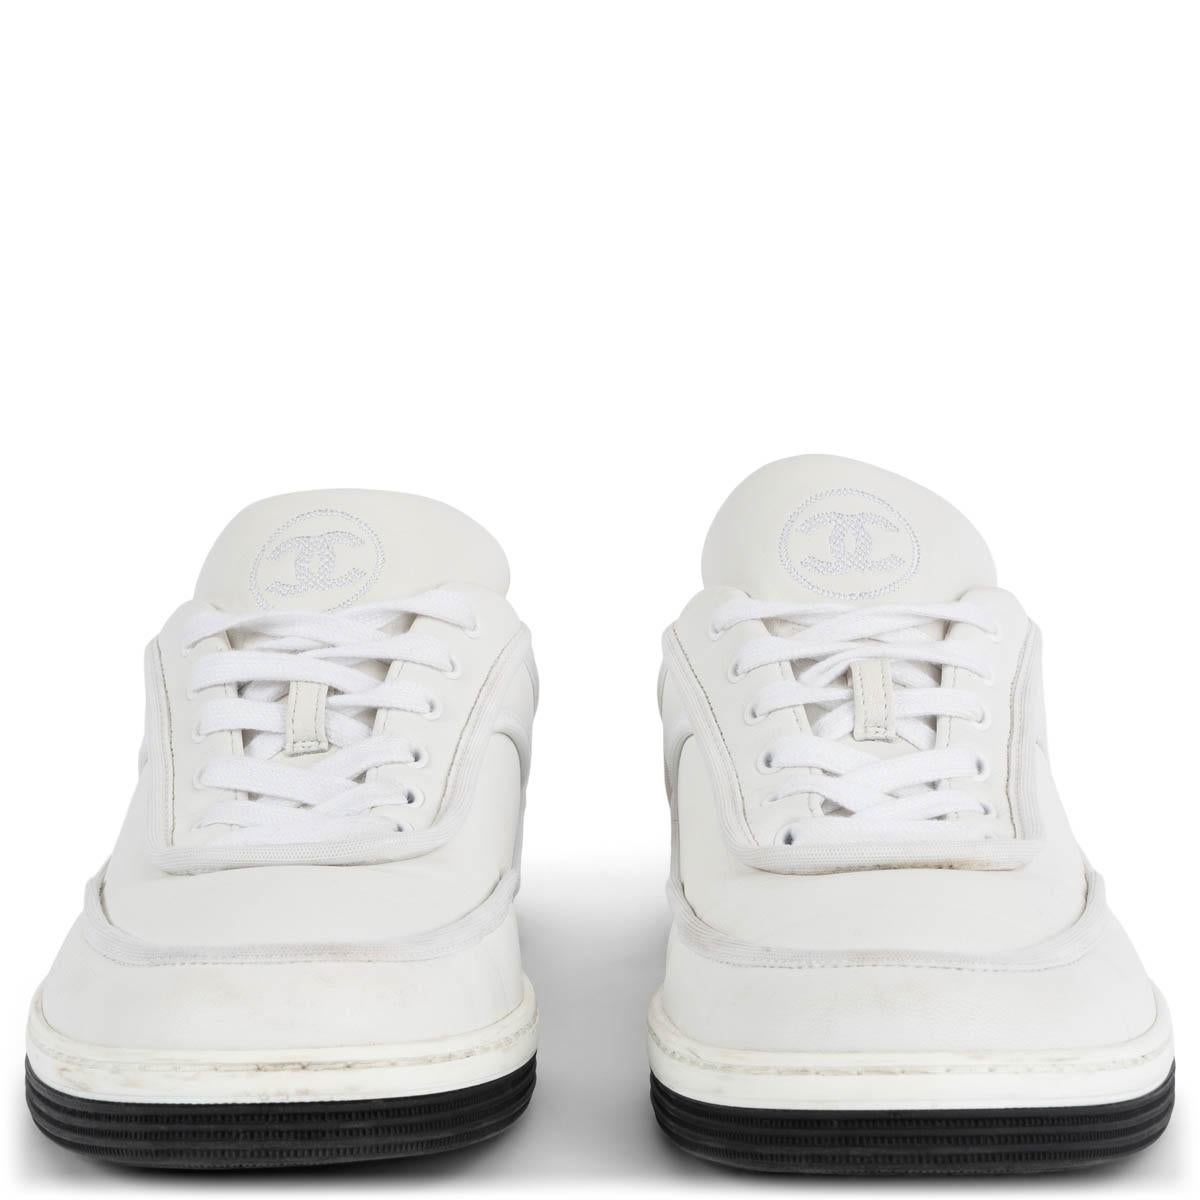 100% authentic Chanel 2021 low-top sneakers in white smooth leather with a black & white rubber sole. Have been worn and show a faint scratch on the left shoe. Overall in excellent condition. 

Measurements
Model	Chanel21S G37488
Imprinted Size	38.5